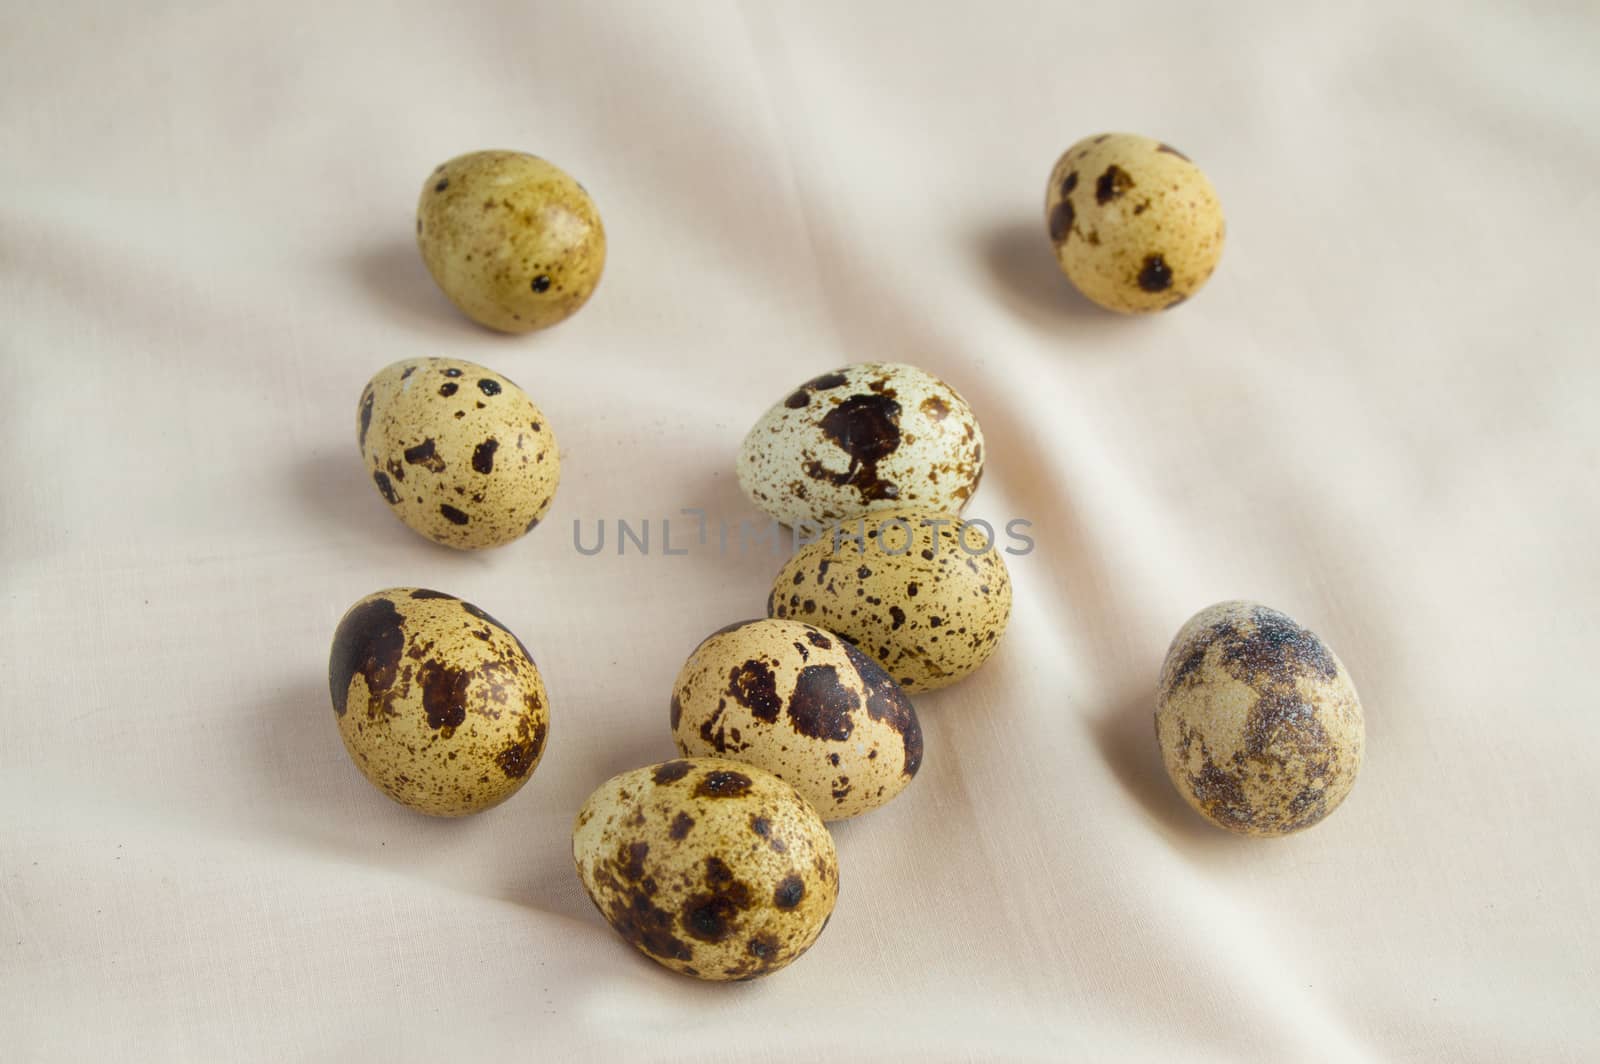 Quail eggs are on the table, the Concept of Easter and a healthy diet.